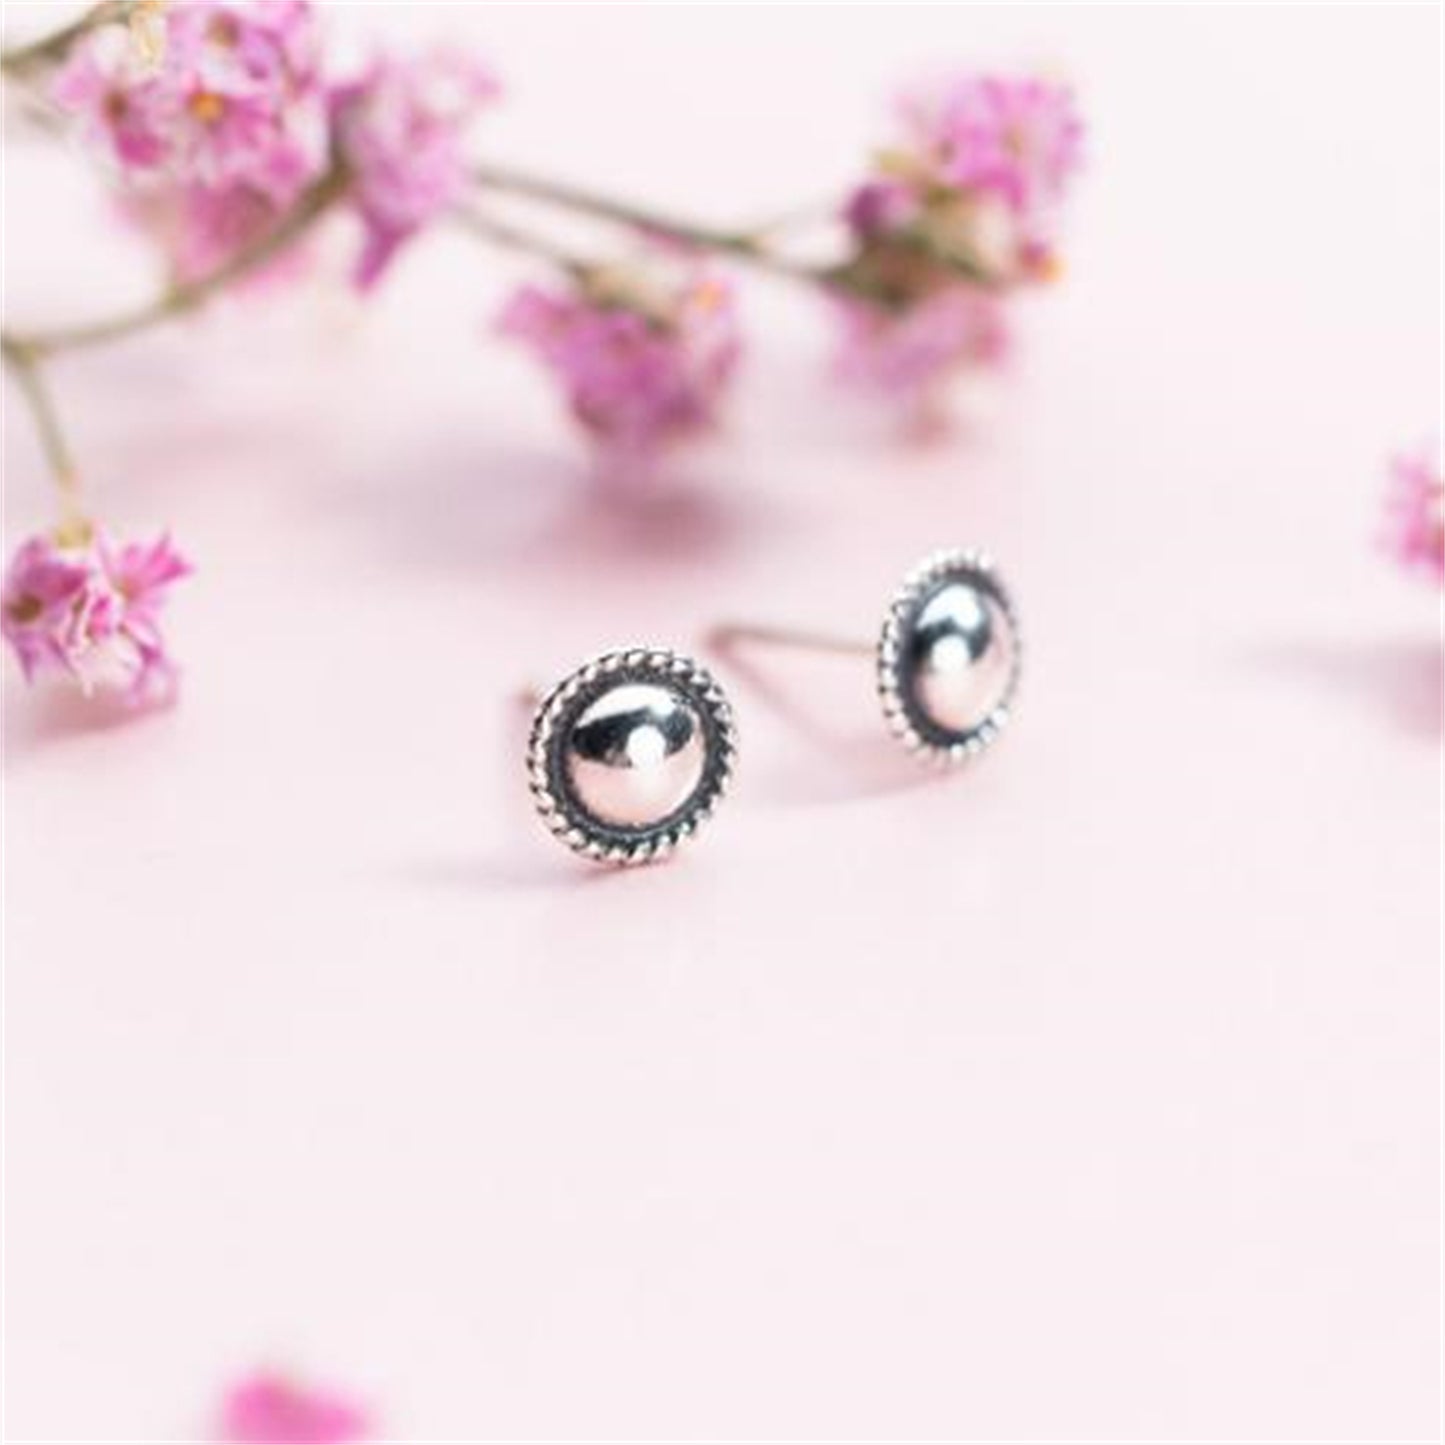 925 Sterling Silver 7mm Round Knot Stud Earrings with Dome Dot Half Ball Beads